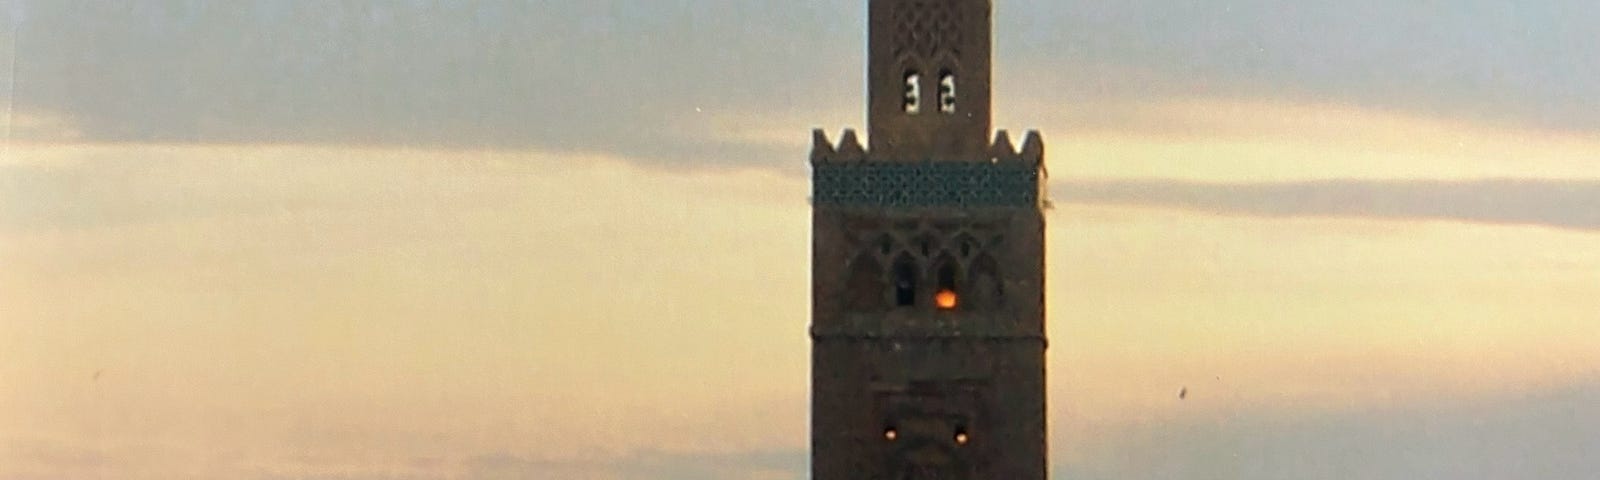 A Moroccan tower towering above the trees with sky the colors of yellow and orange as the sun set.